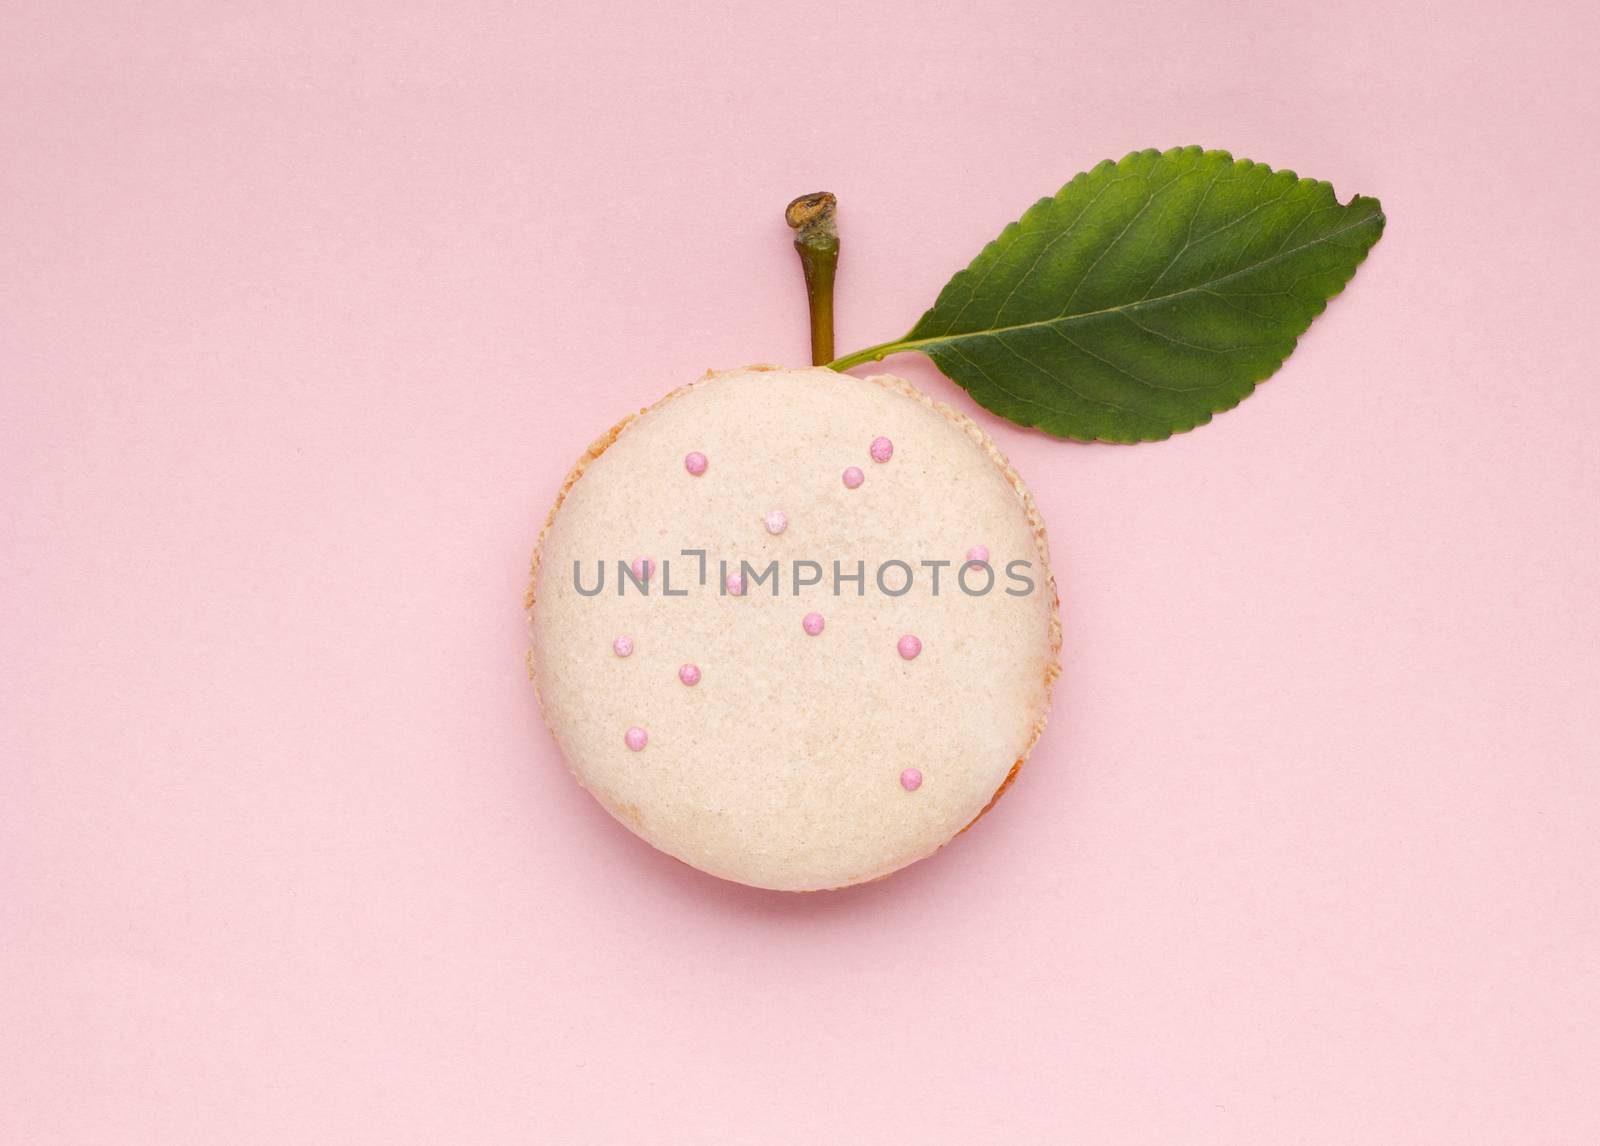 Creative concept photo of a macaroon with apple leaf and twig on pink background.